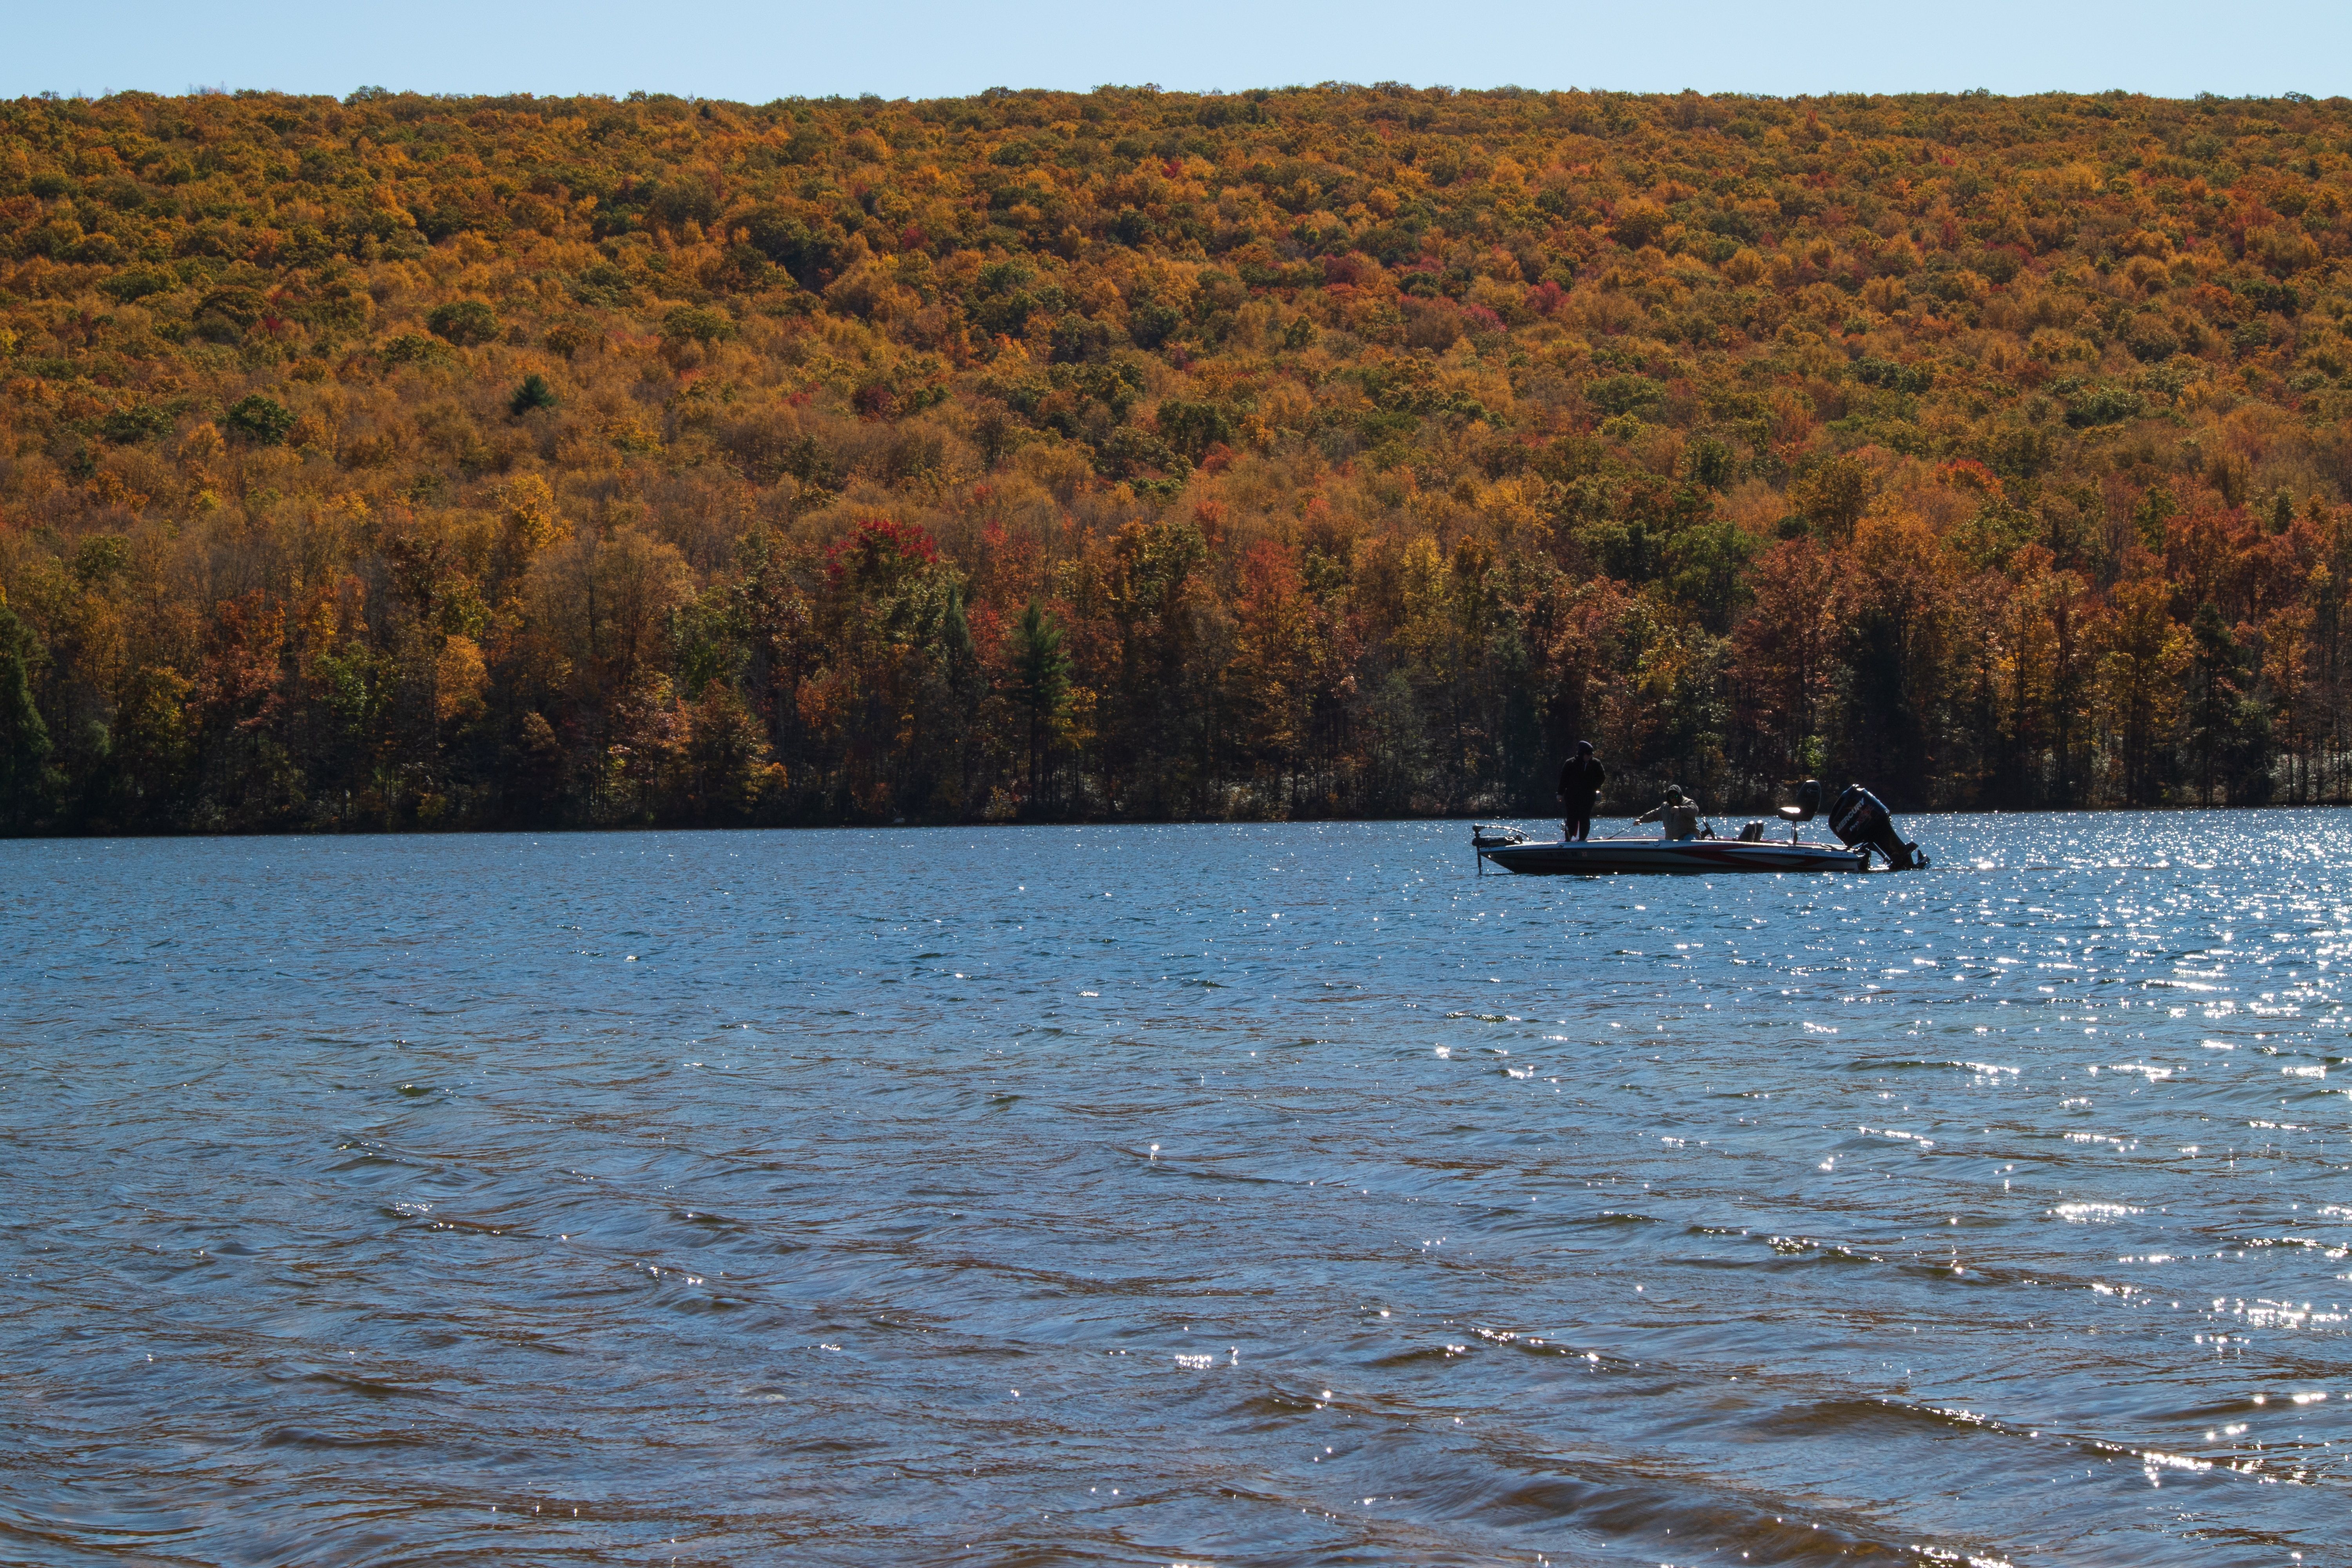 Boat on a body of water at Mauch Chunk Lake Park in Jim Thorpe during fall